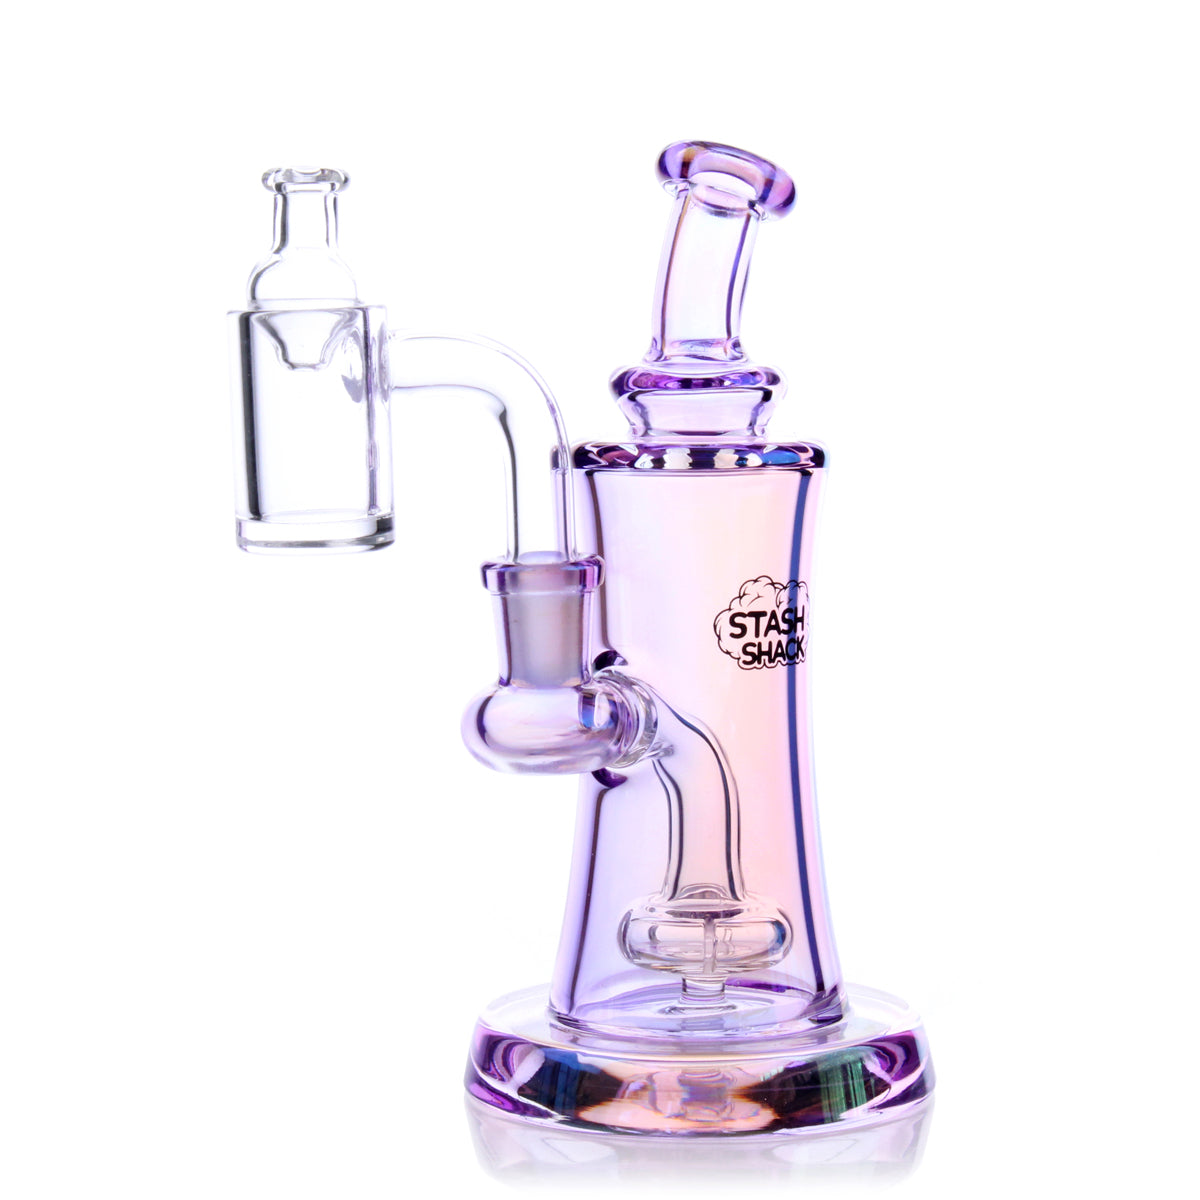 Elysian Mini Rig by The Stash Shack in Purple, Compact Design with Banger Hanger, Front View